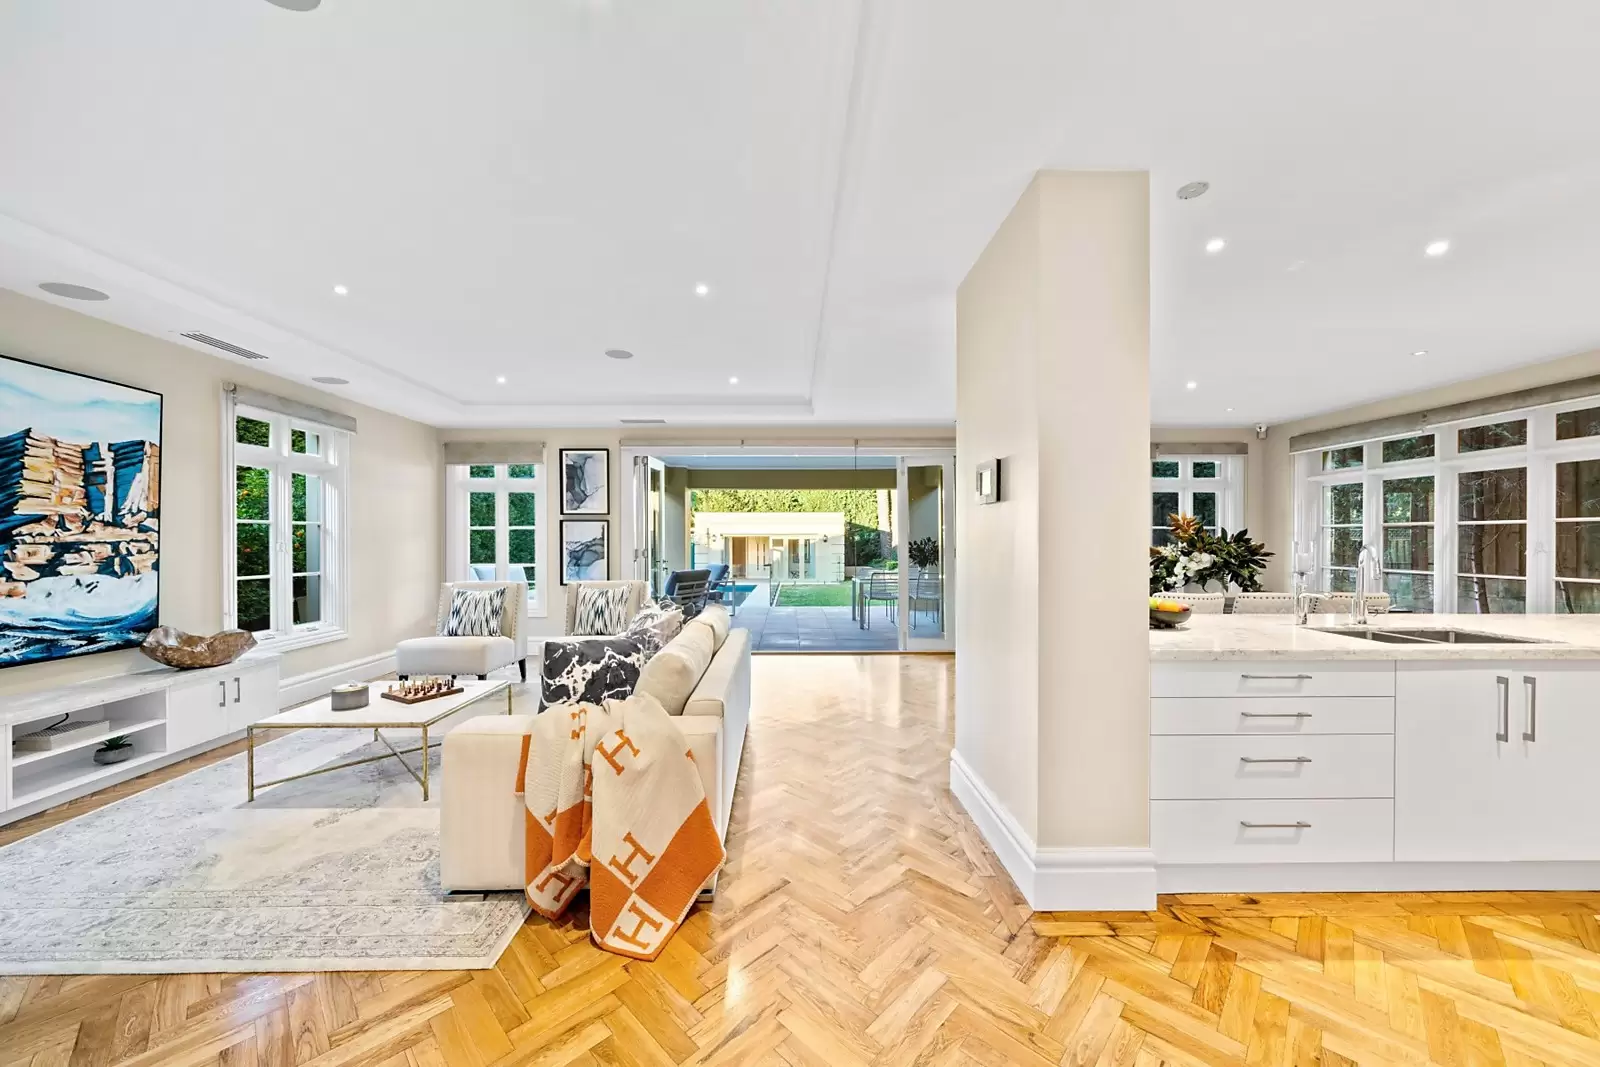 Photo #6: 81 Balfour Road, Bellevue Hill - Sold by Sydney Sotheby's International Realty